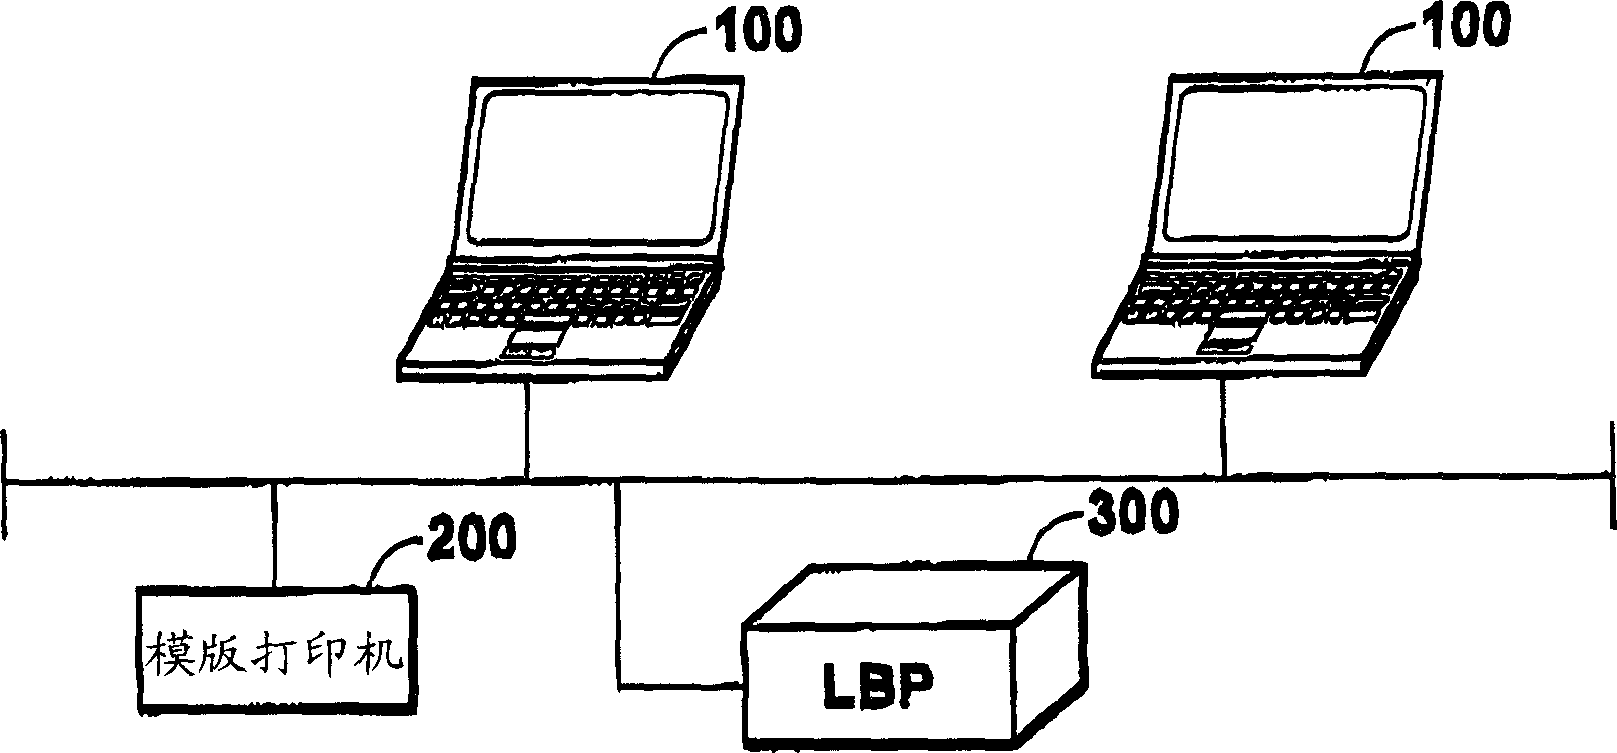 Printing control system and computer program for controlling print